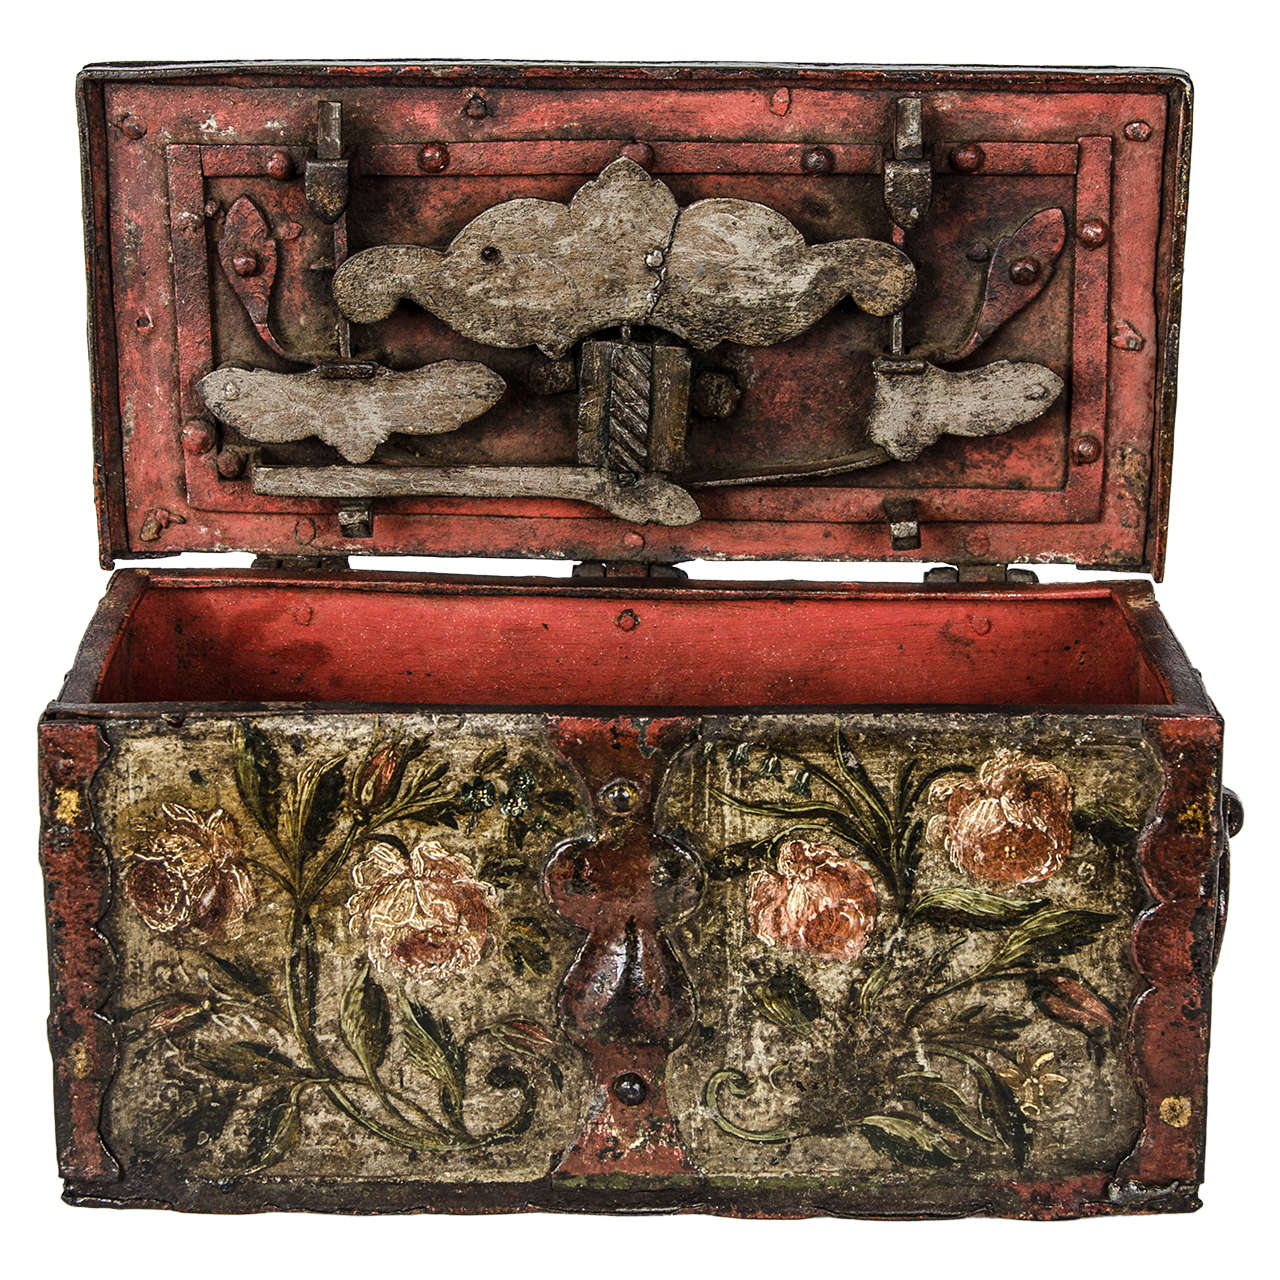 North European Small Painted Dowry Casket